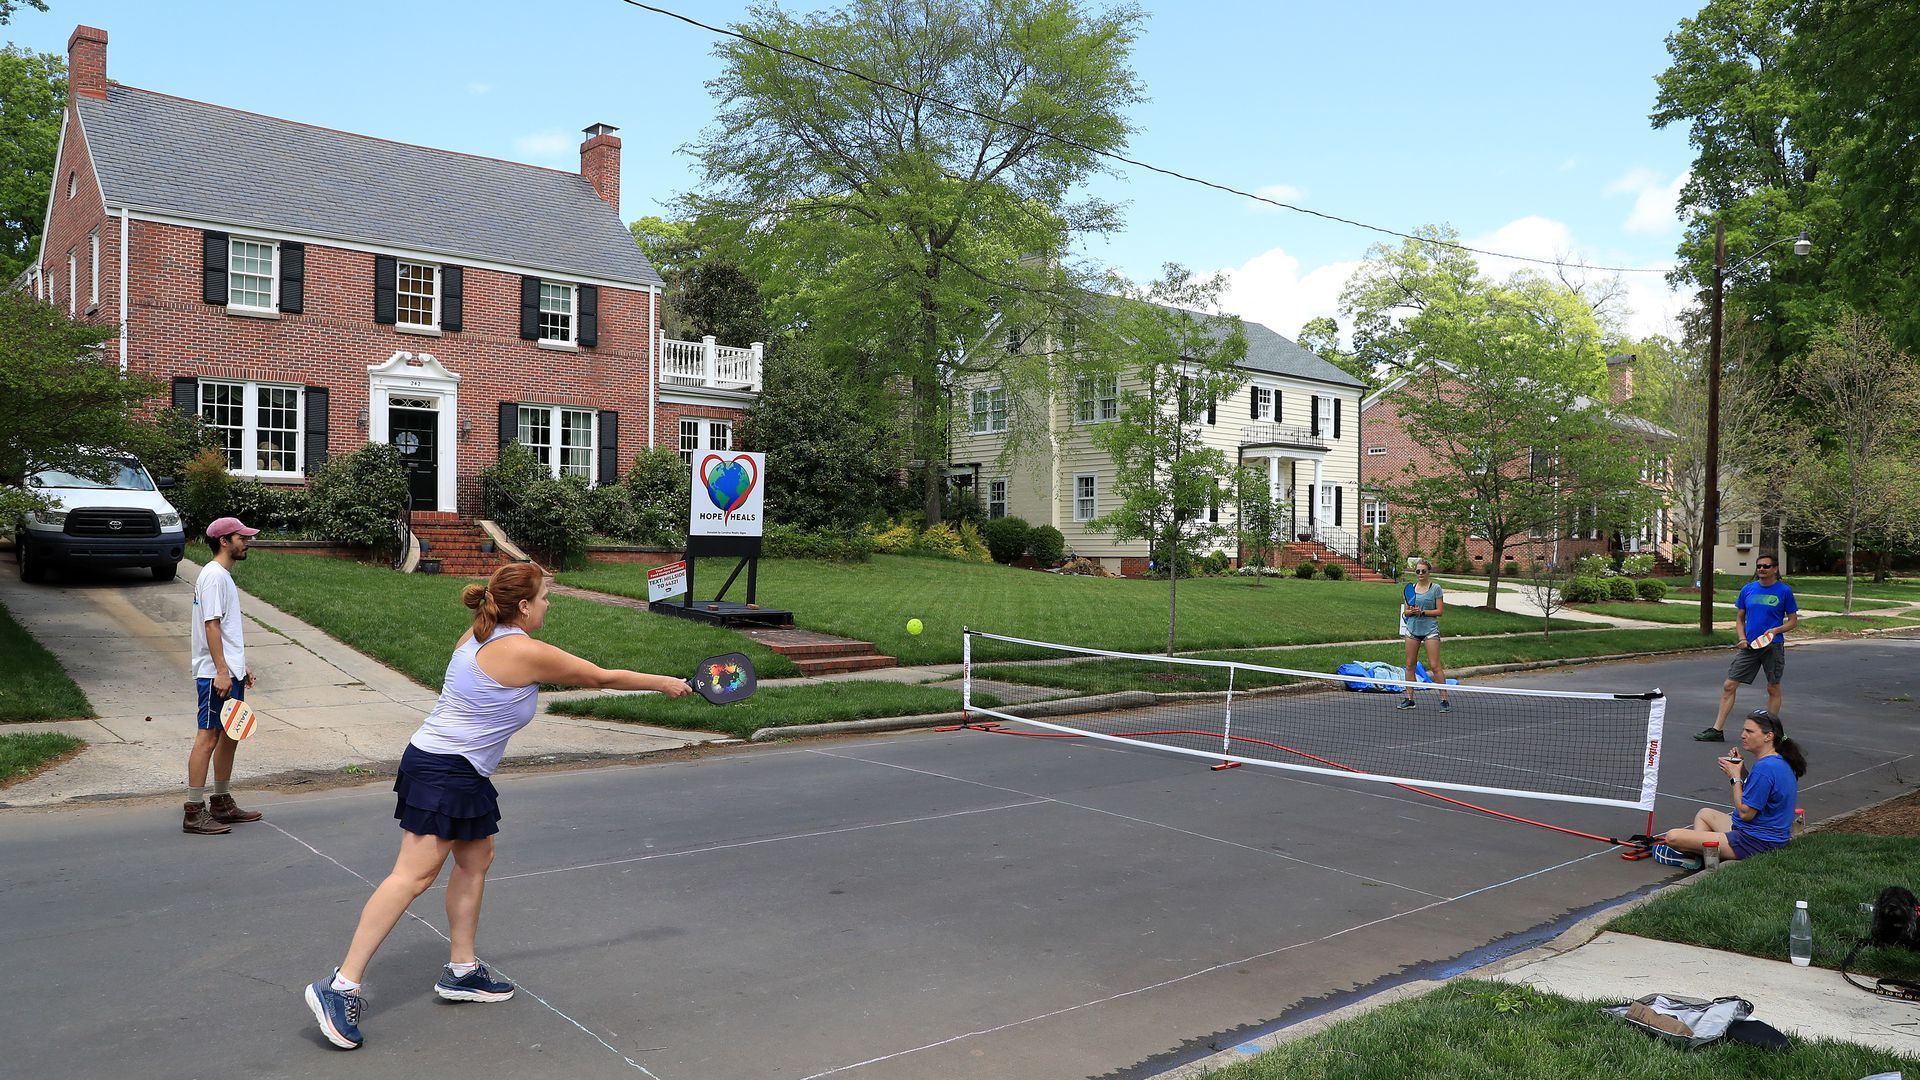 Playing pickleball on the street in Charlotte, N.C., during the pandemic. Photo: Streeter Lecka/Getty Images